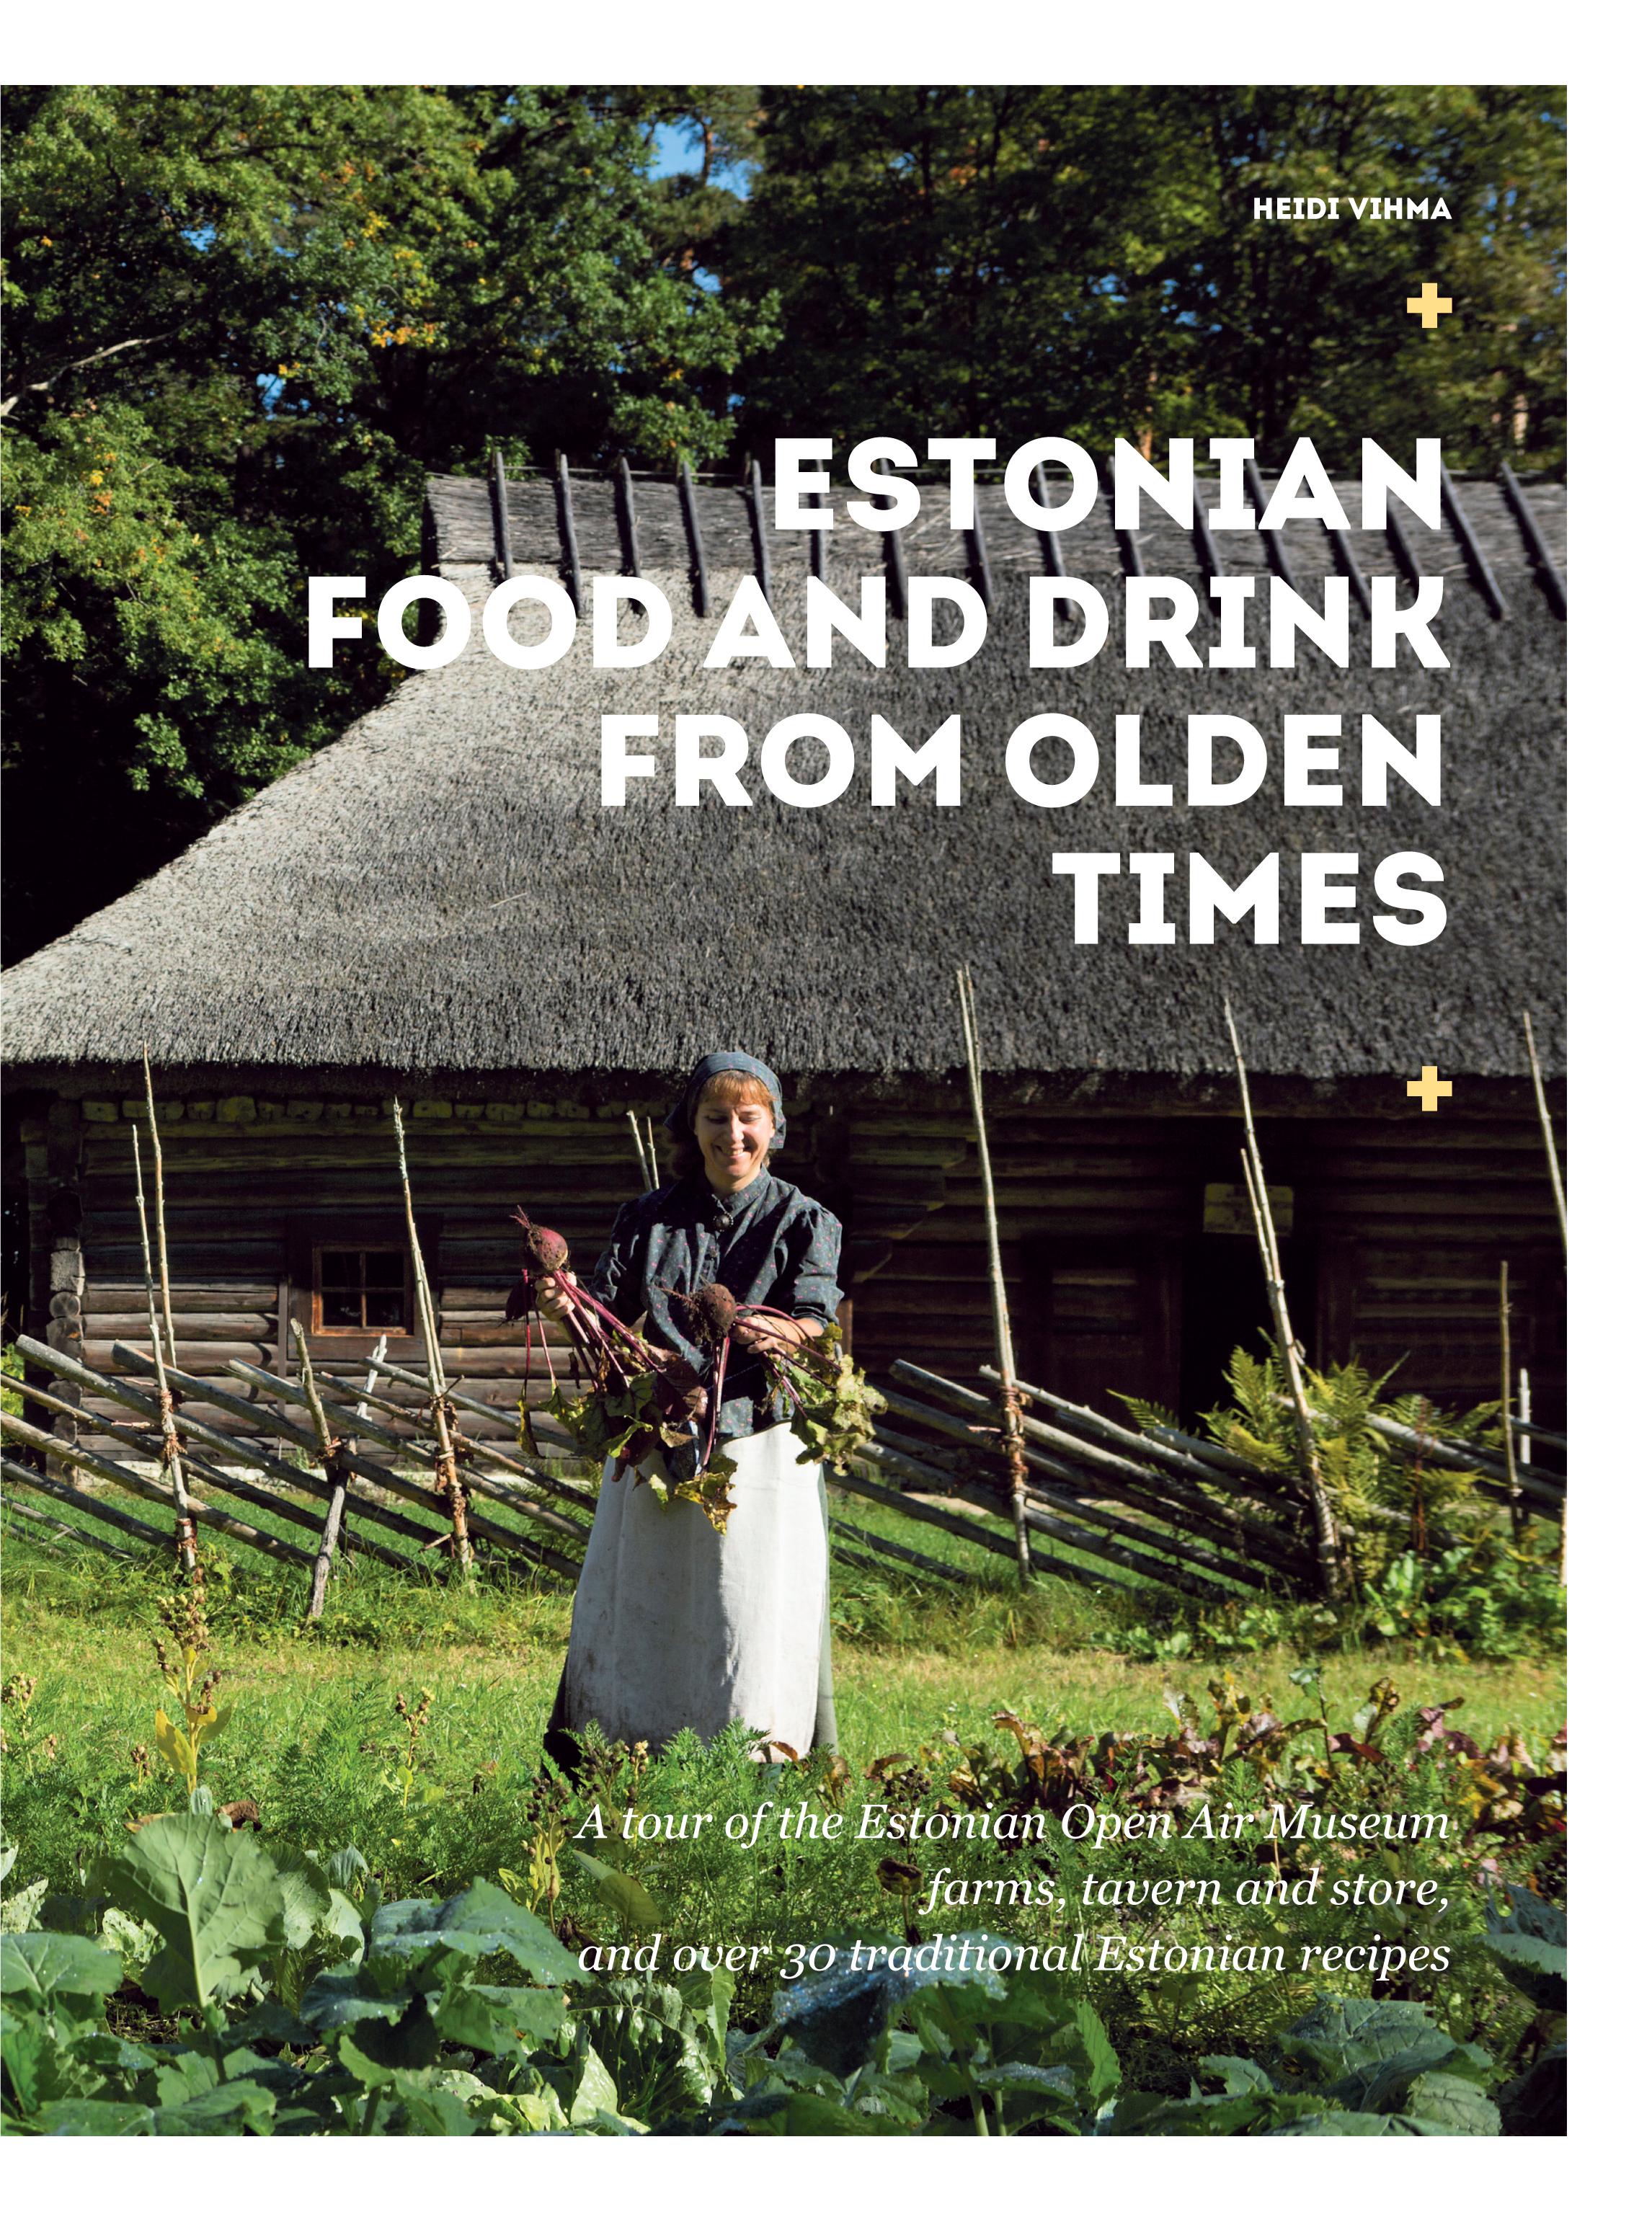 Estonian Food and Drink From Olden Times